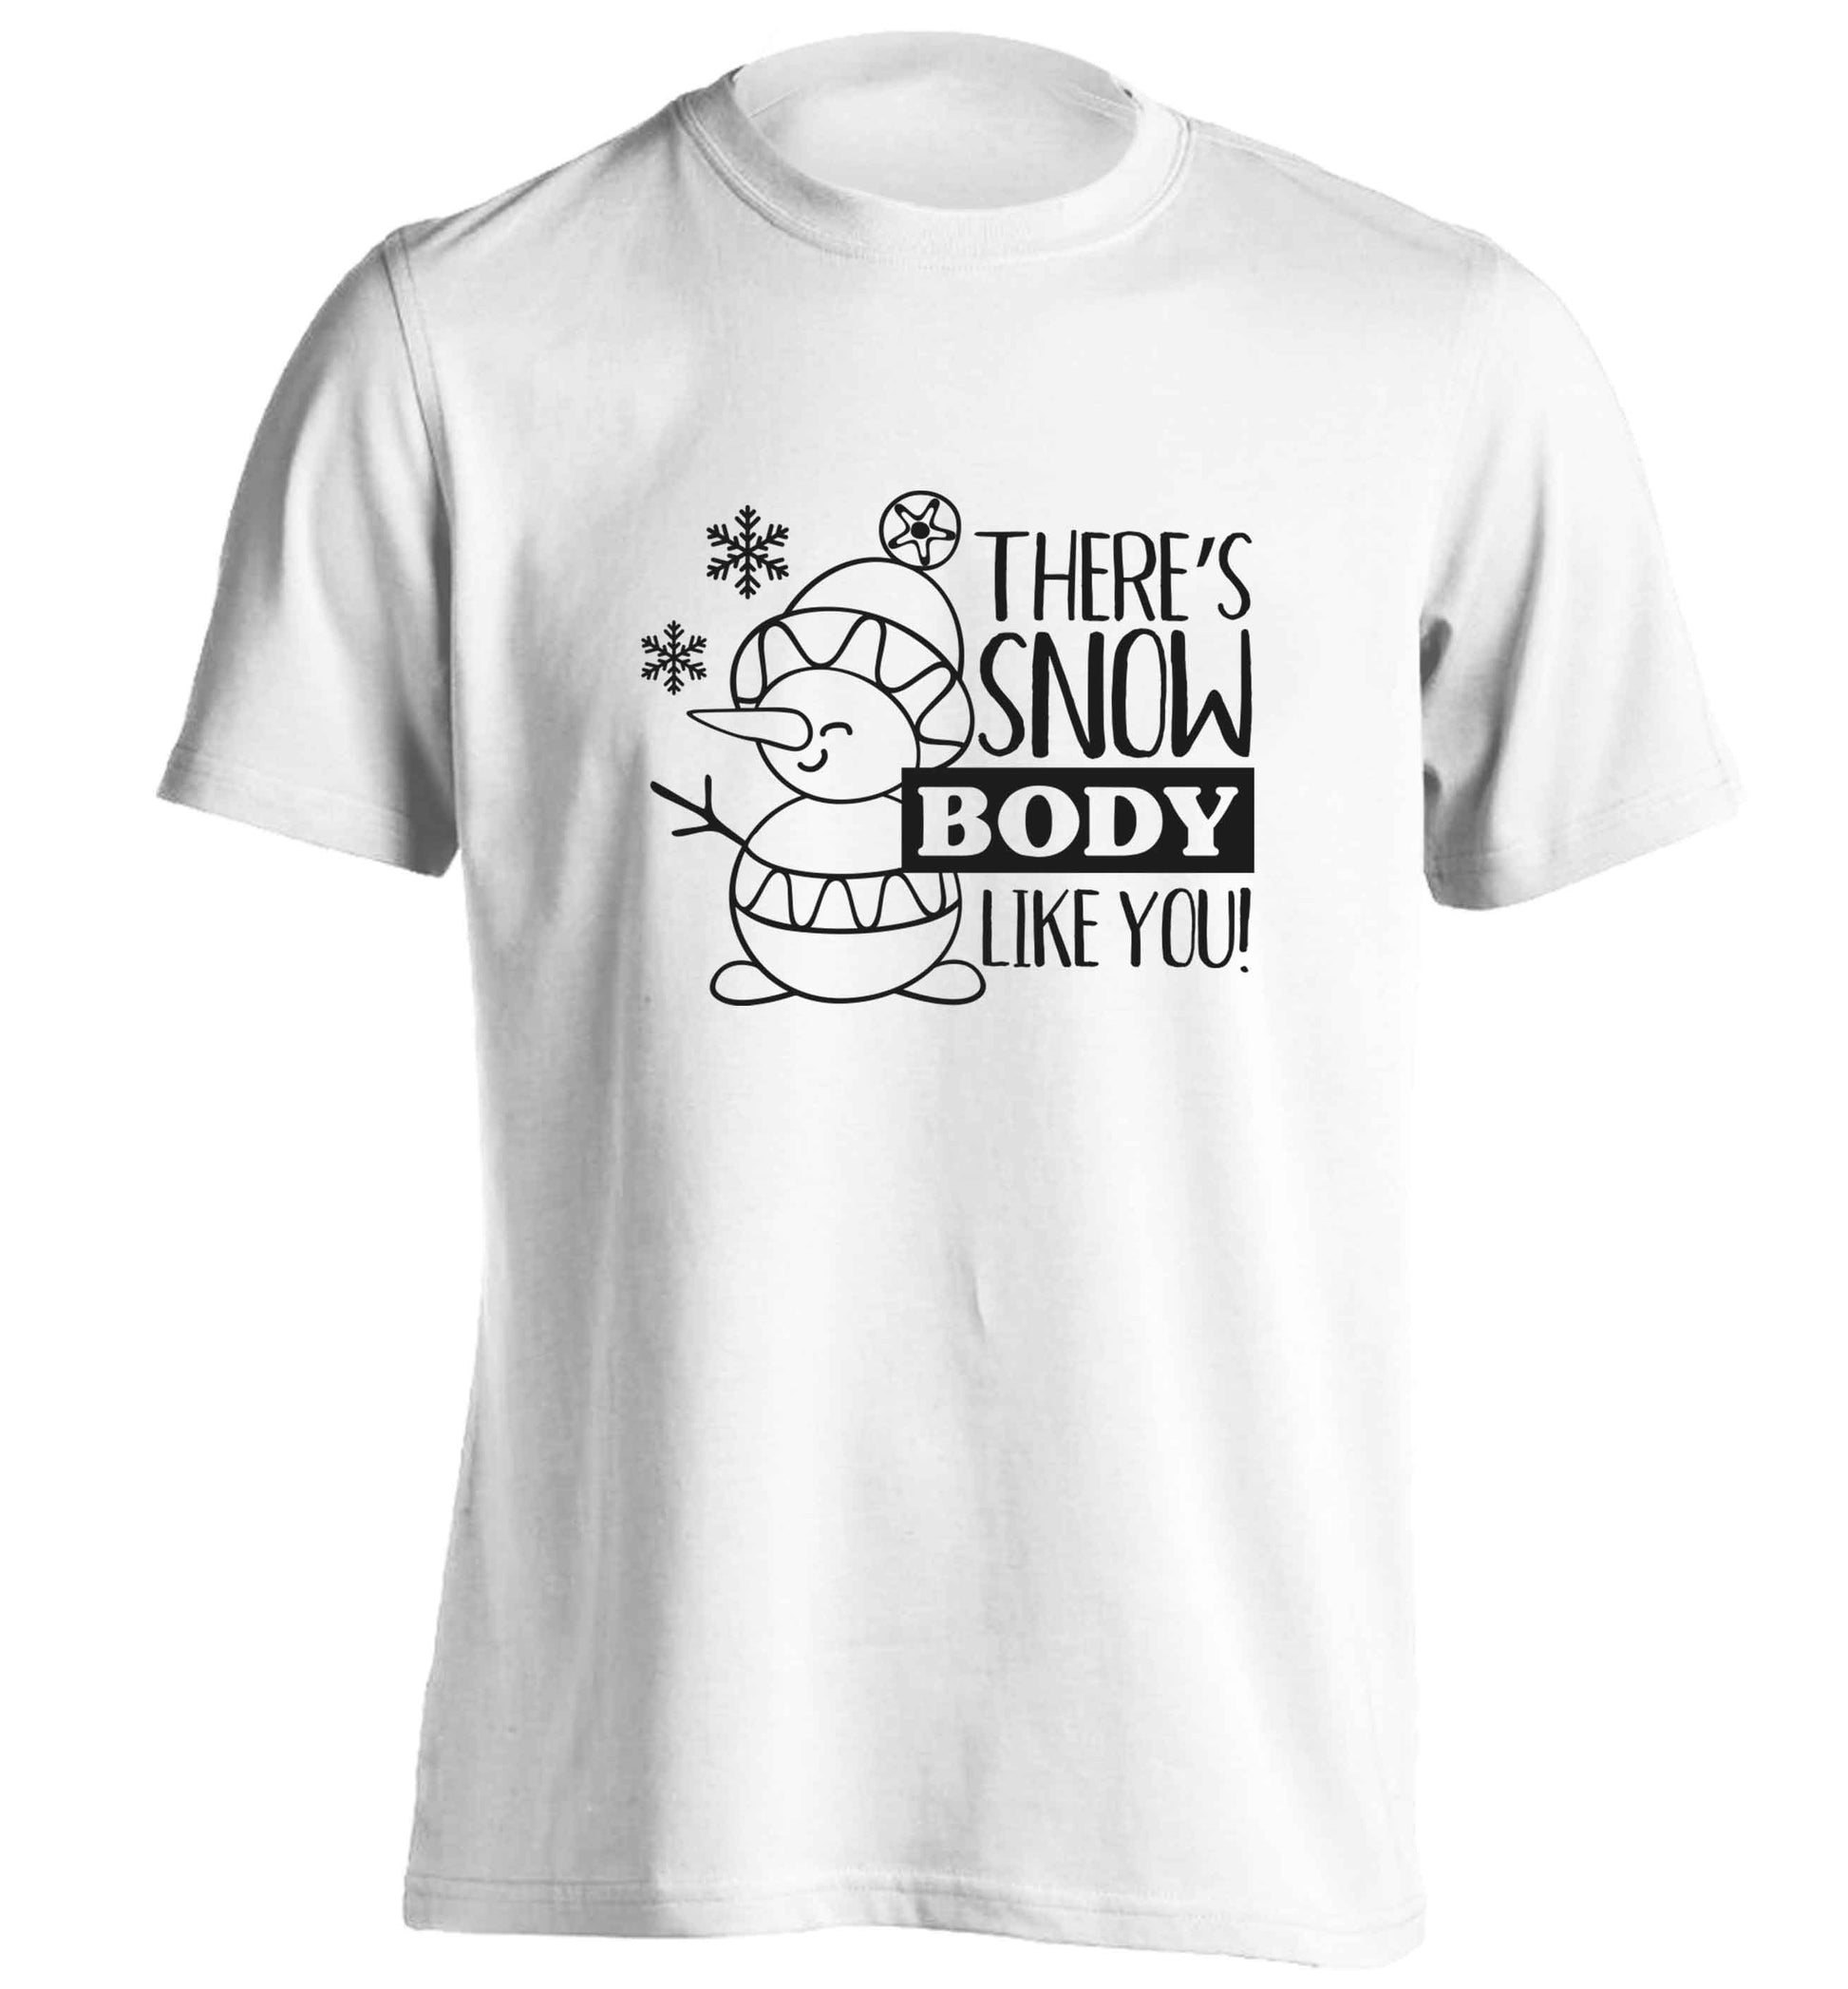 There's snow body like you adults unisex white Tshirt 2XL